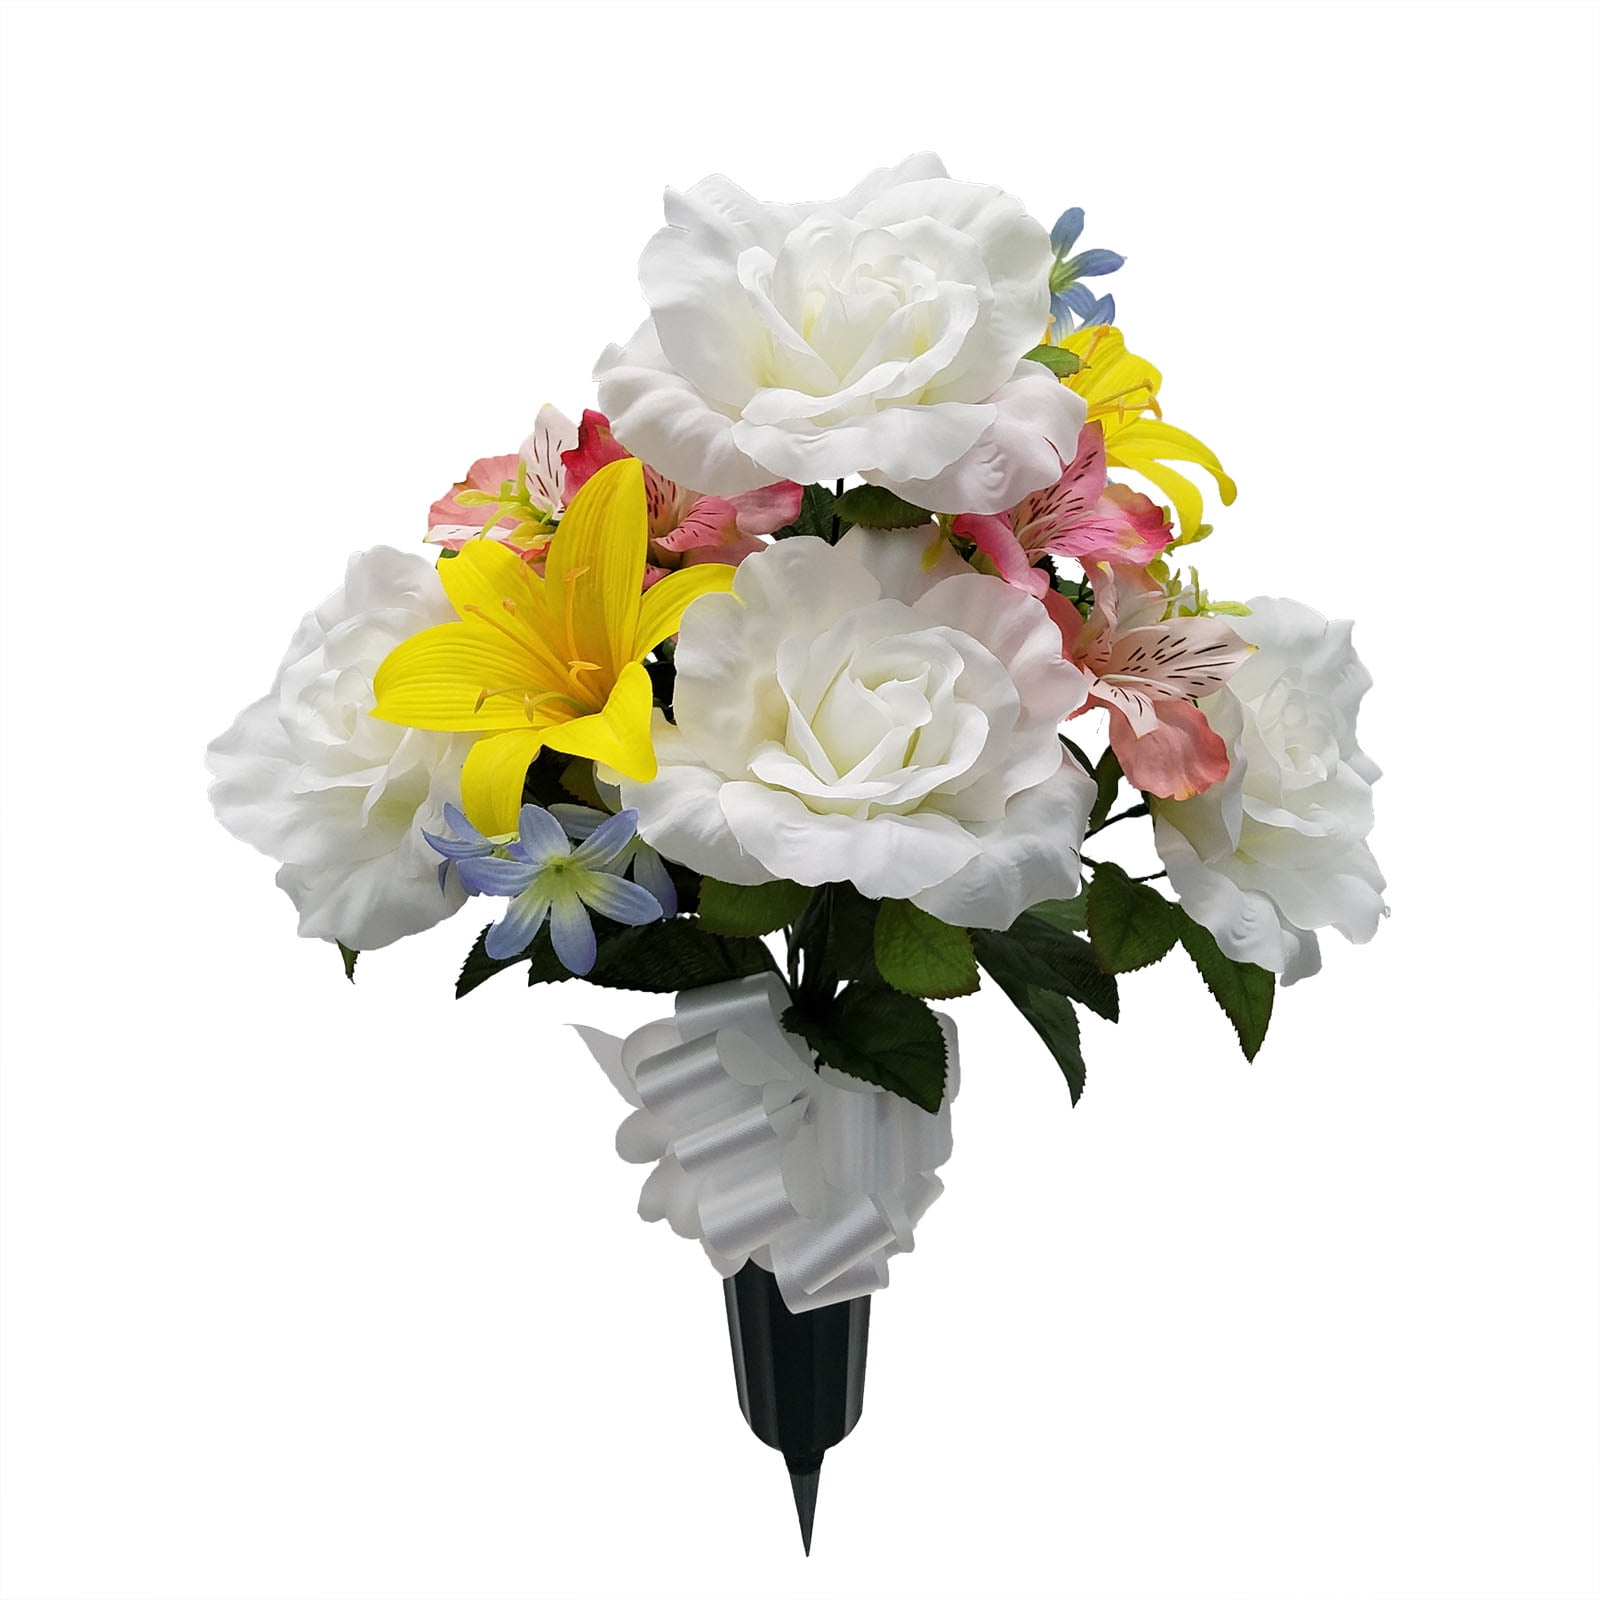 Mainstays 20 Artificial Flower, Rose and Lily, Cemetery, White Color.